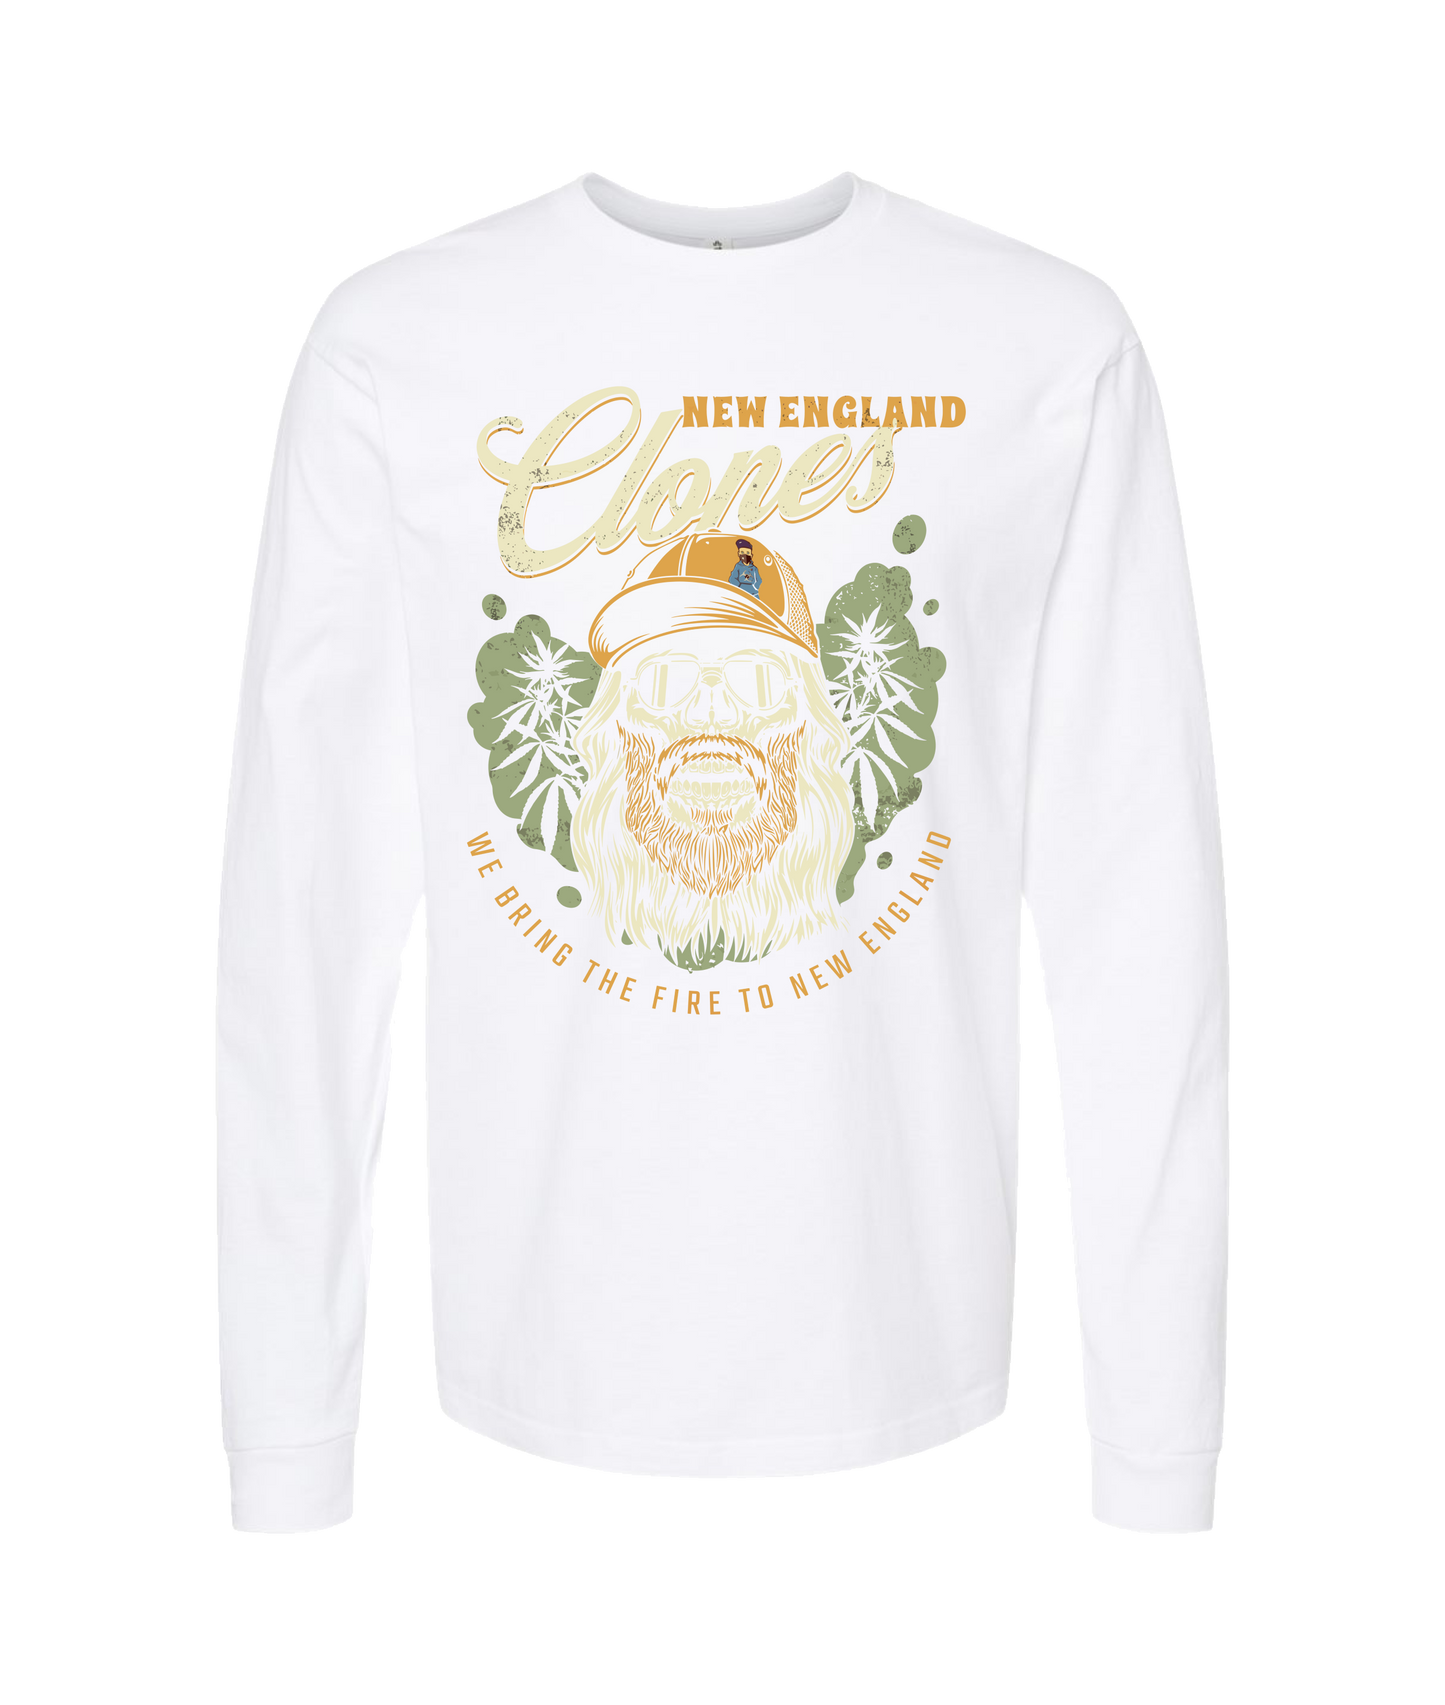 New England Clones - WE BRING THE FIRE - White Long Sleeve T